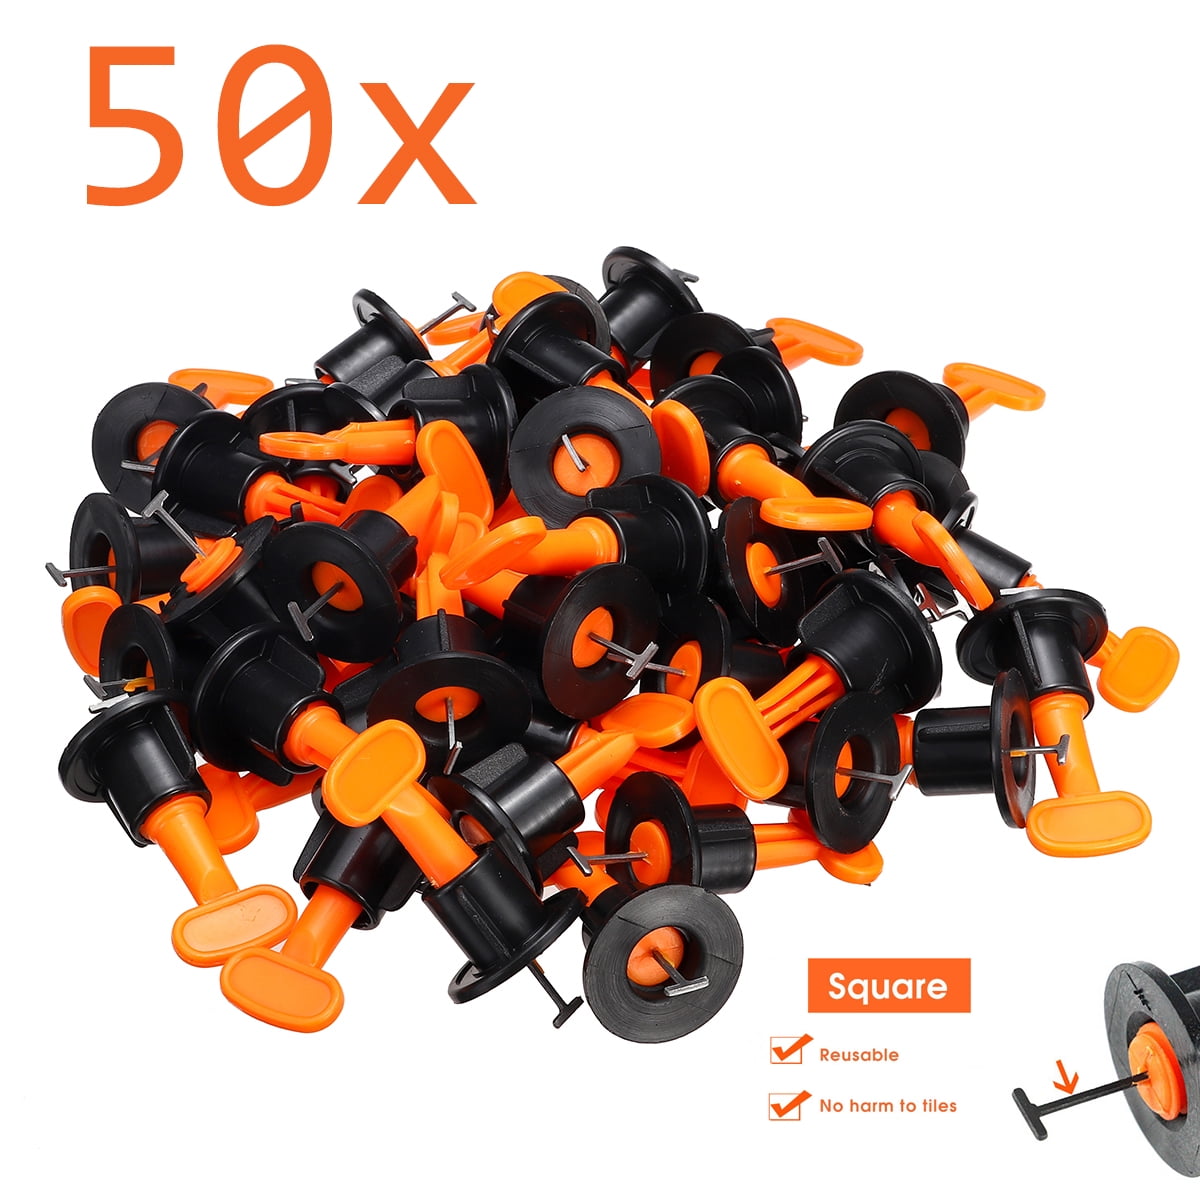 50x Flat Ceramic Floor Wall Construction Tools Reusable Tile Leveling System Kit